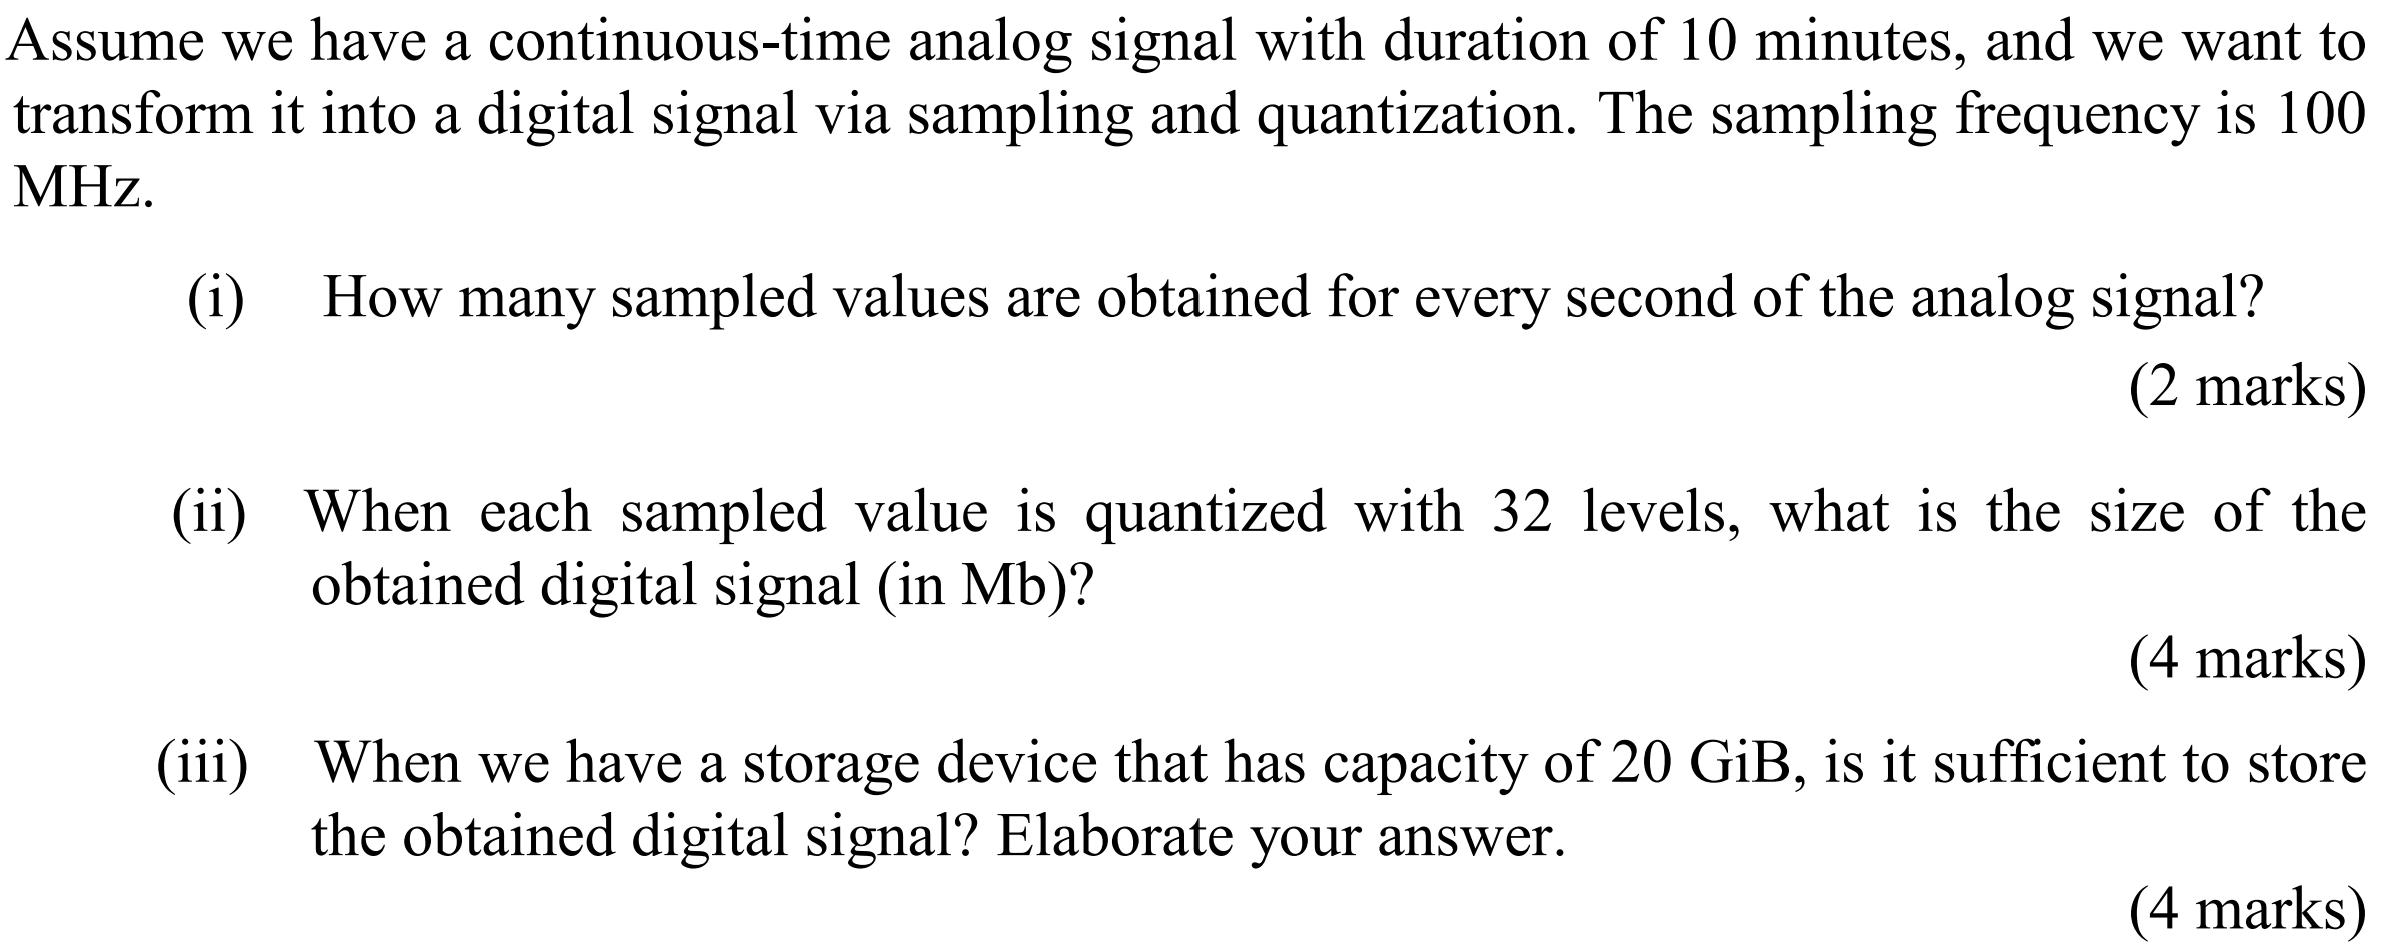 Assume we have a continuous-time analog signal with duration of 10 minutes, and we want to transform it into